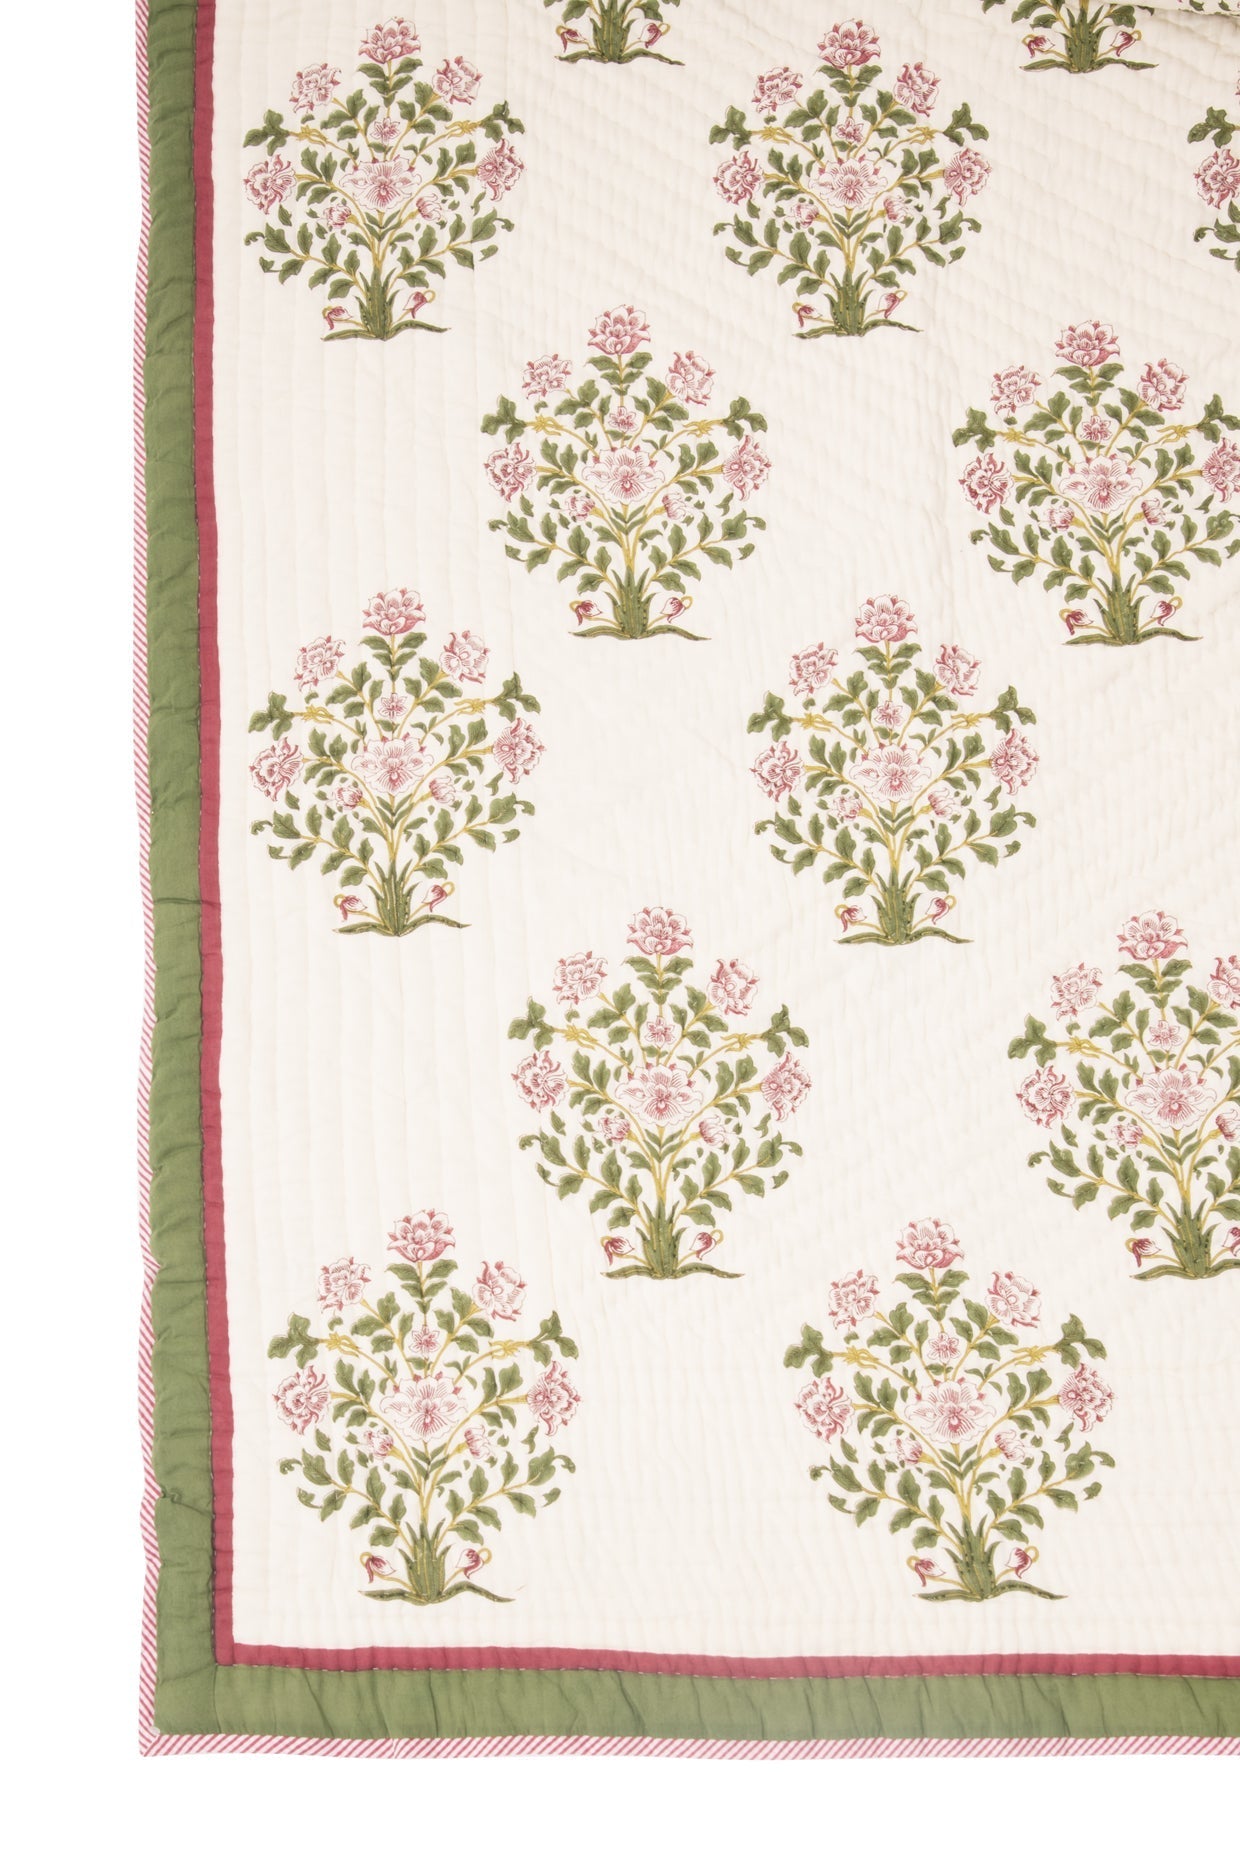 Floral Bunch Motif Hand Block Printed Quilt By Pinjore